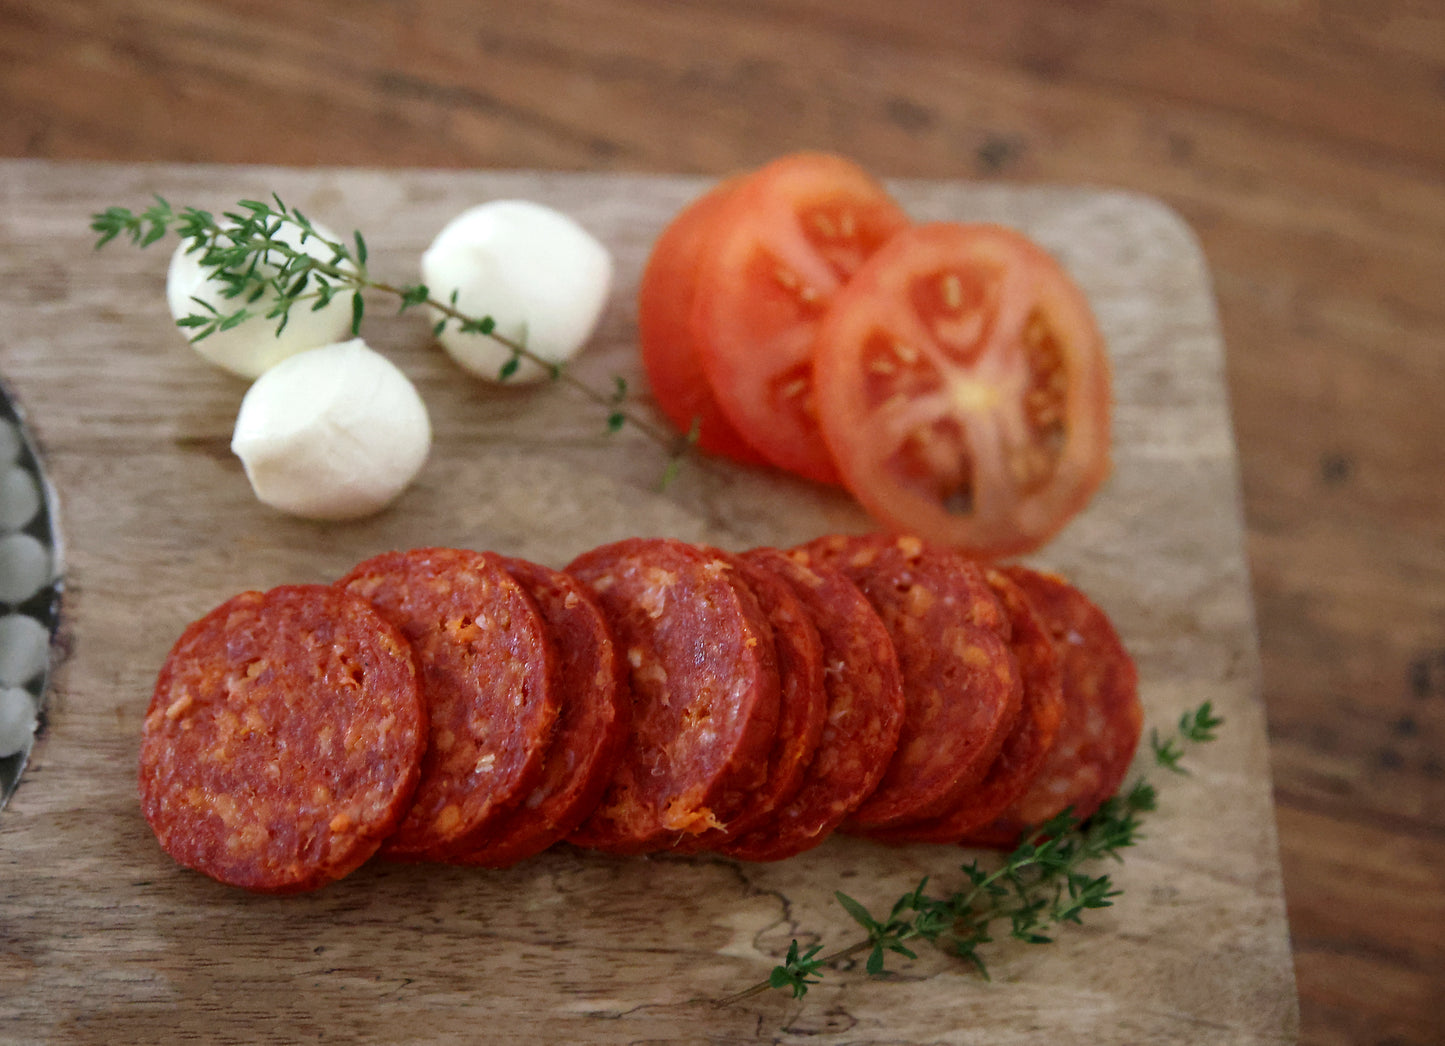 Cantimpalo Full Salami Approx 780g random weight packet. Regular price $25.00 AUD [You are guaranteed to receive at least 750g of product, equivalent price of $33.33 per kg.]